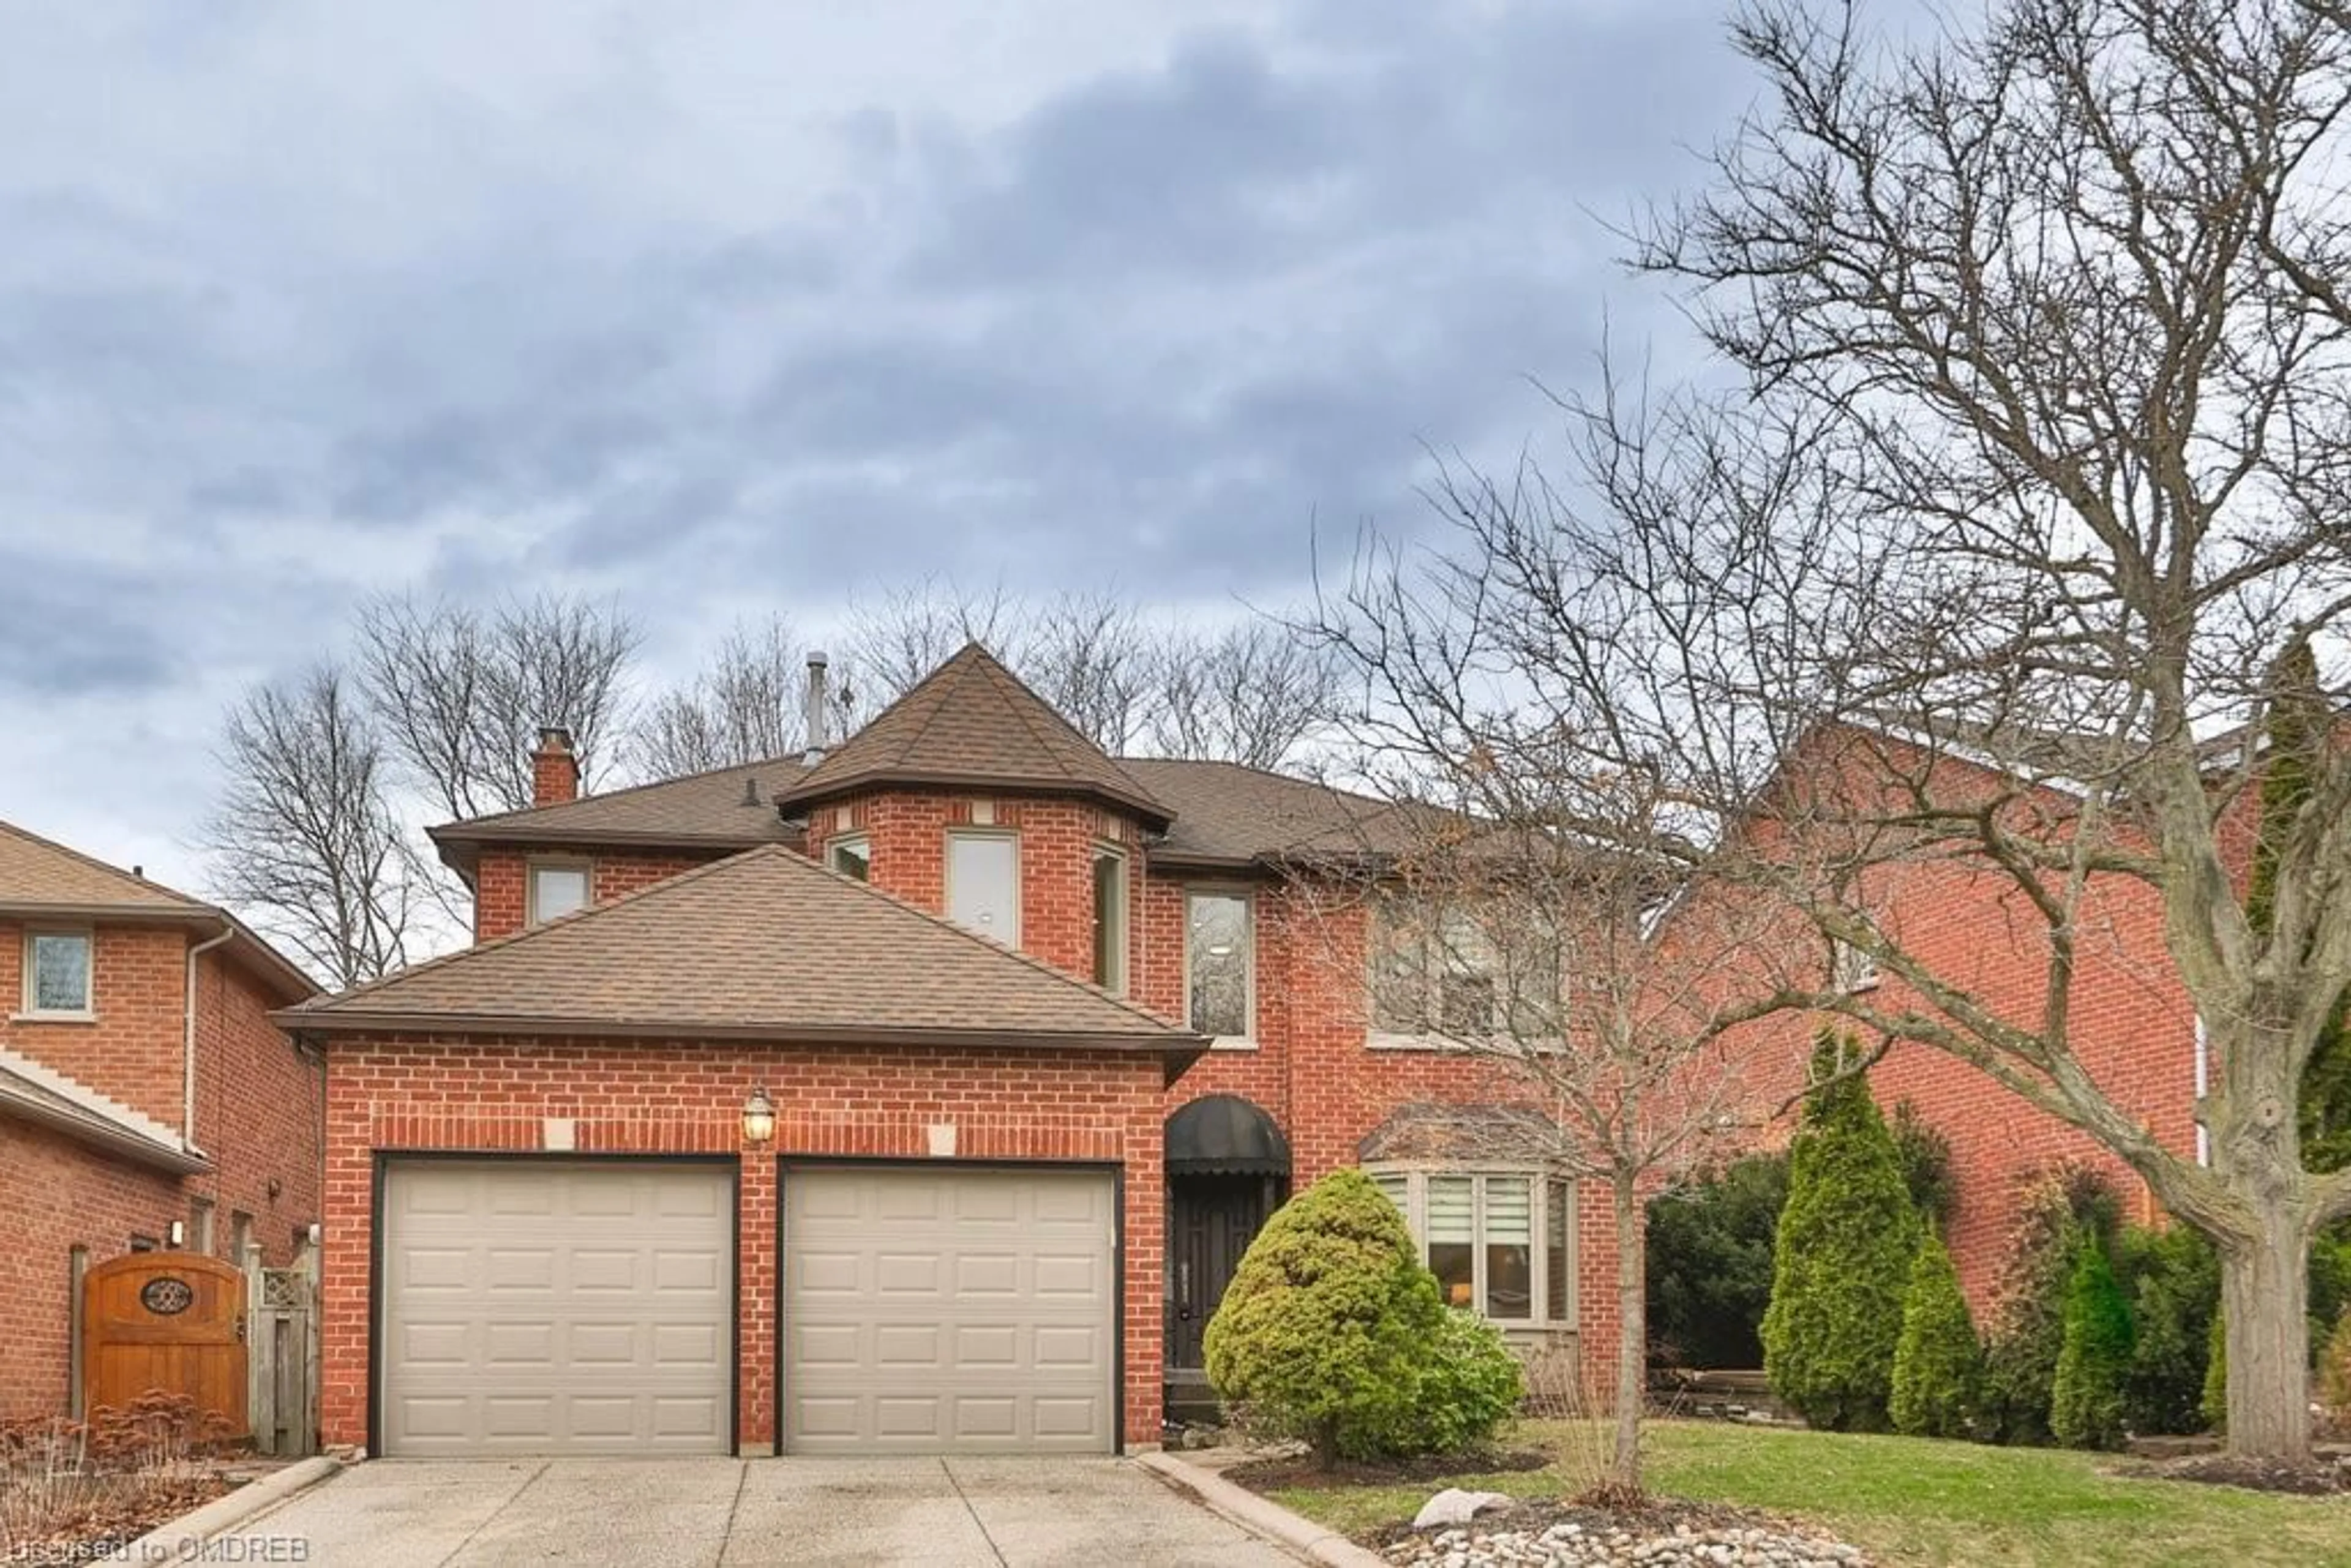 Home with brick exterior material for 2028 Markle Dr, Oakville Ontario L6H 3T3